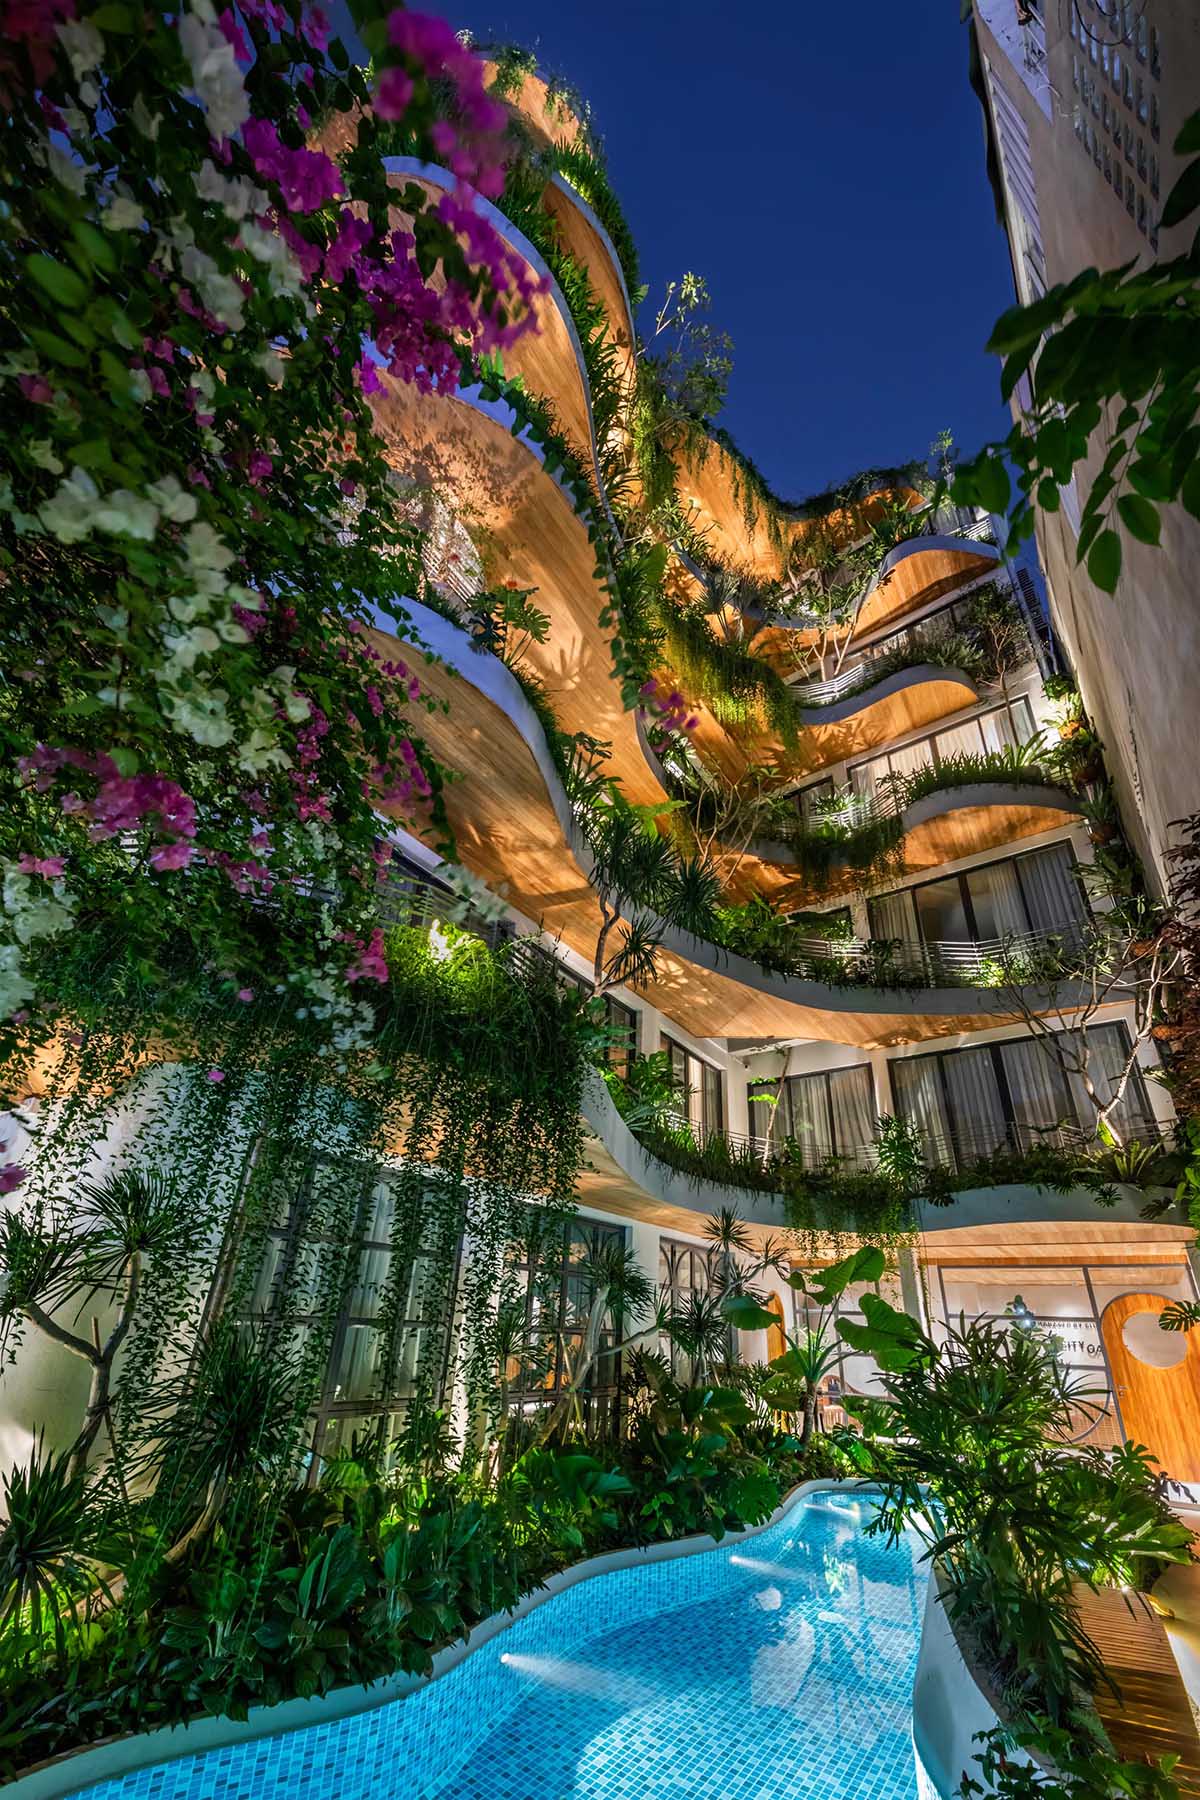 A modern building with curved balconies and overhanging plants.